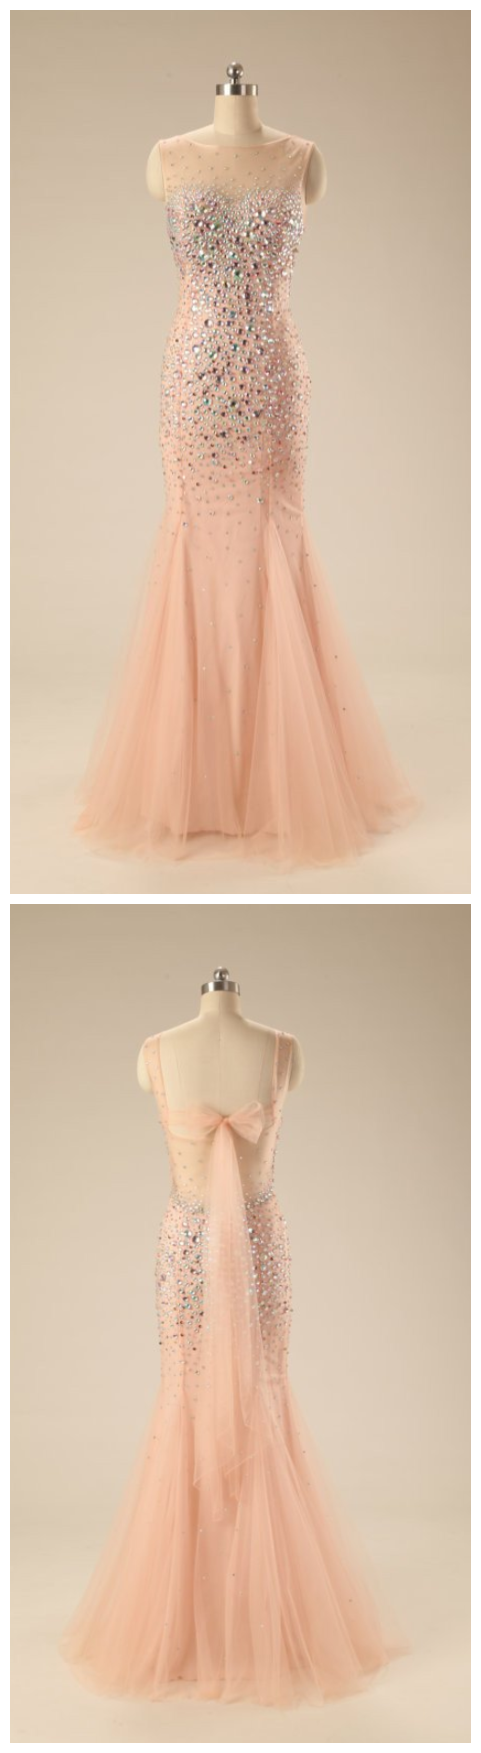 Tulle Beading Prom Dresses,sequins Round Neck Bowknot Mermaid Long Evening Dresses